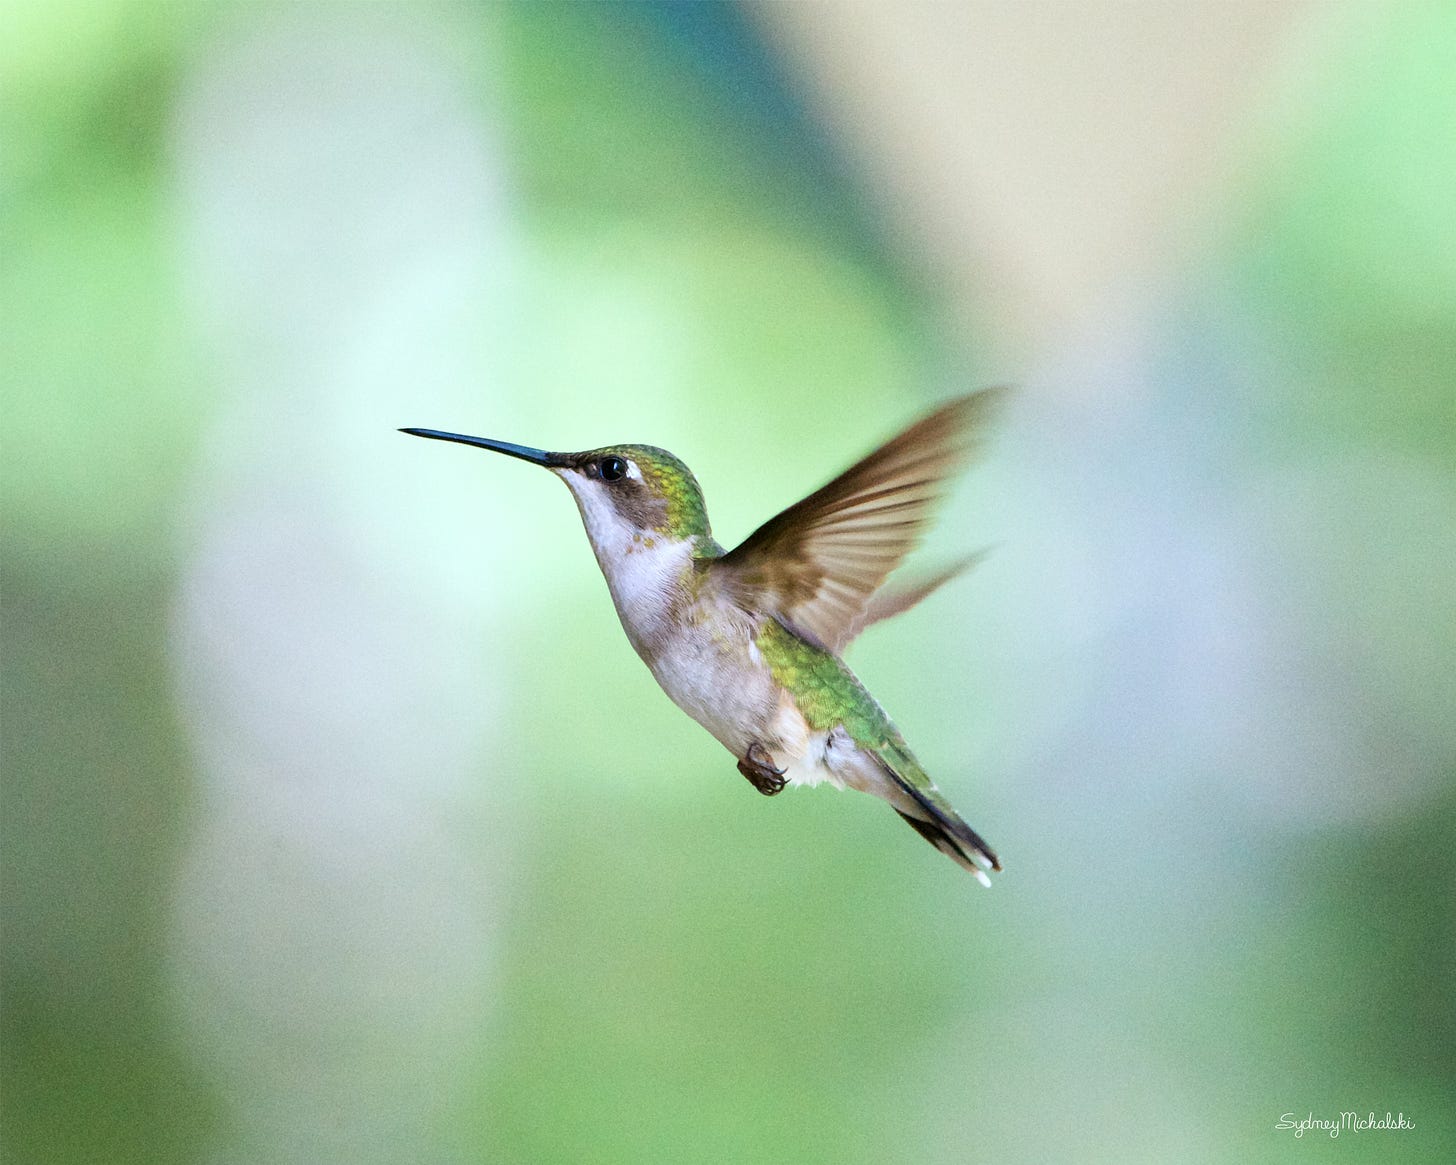 A female ruby-throated hummingbird hovers against a summery green background.